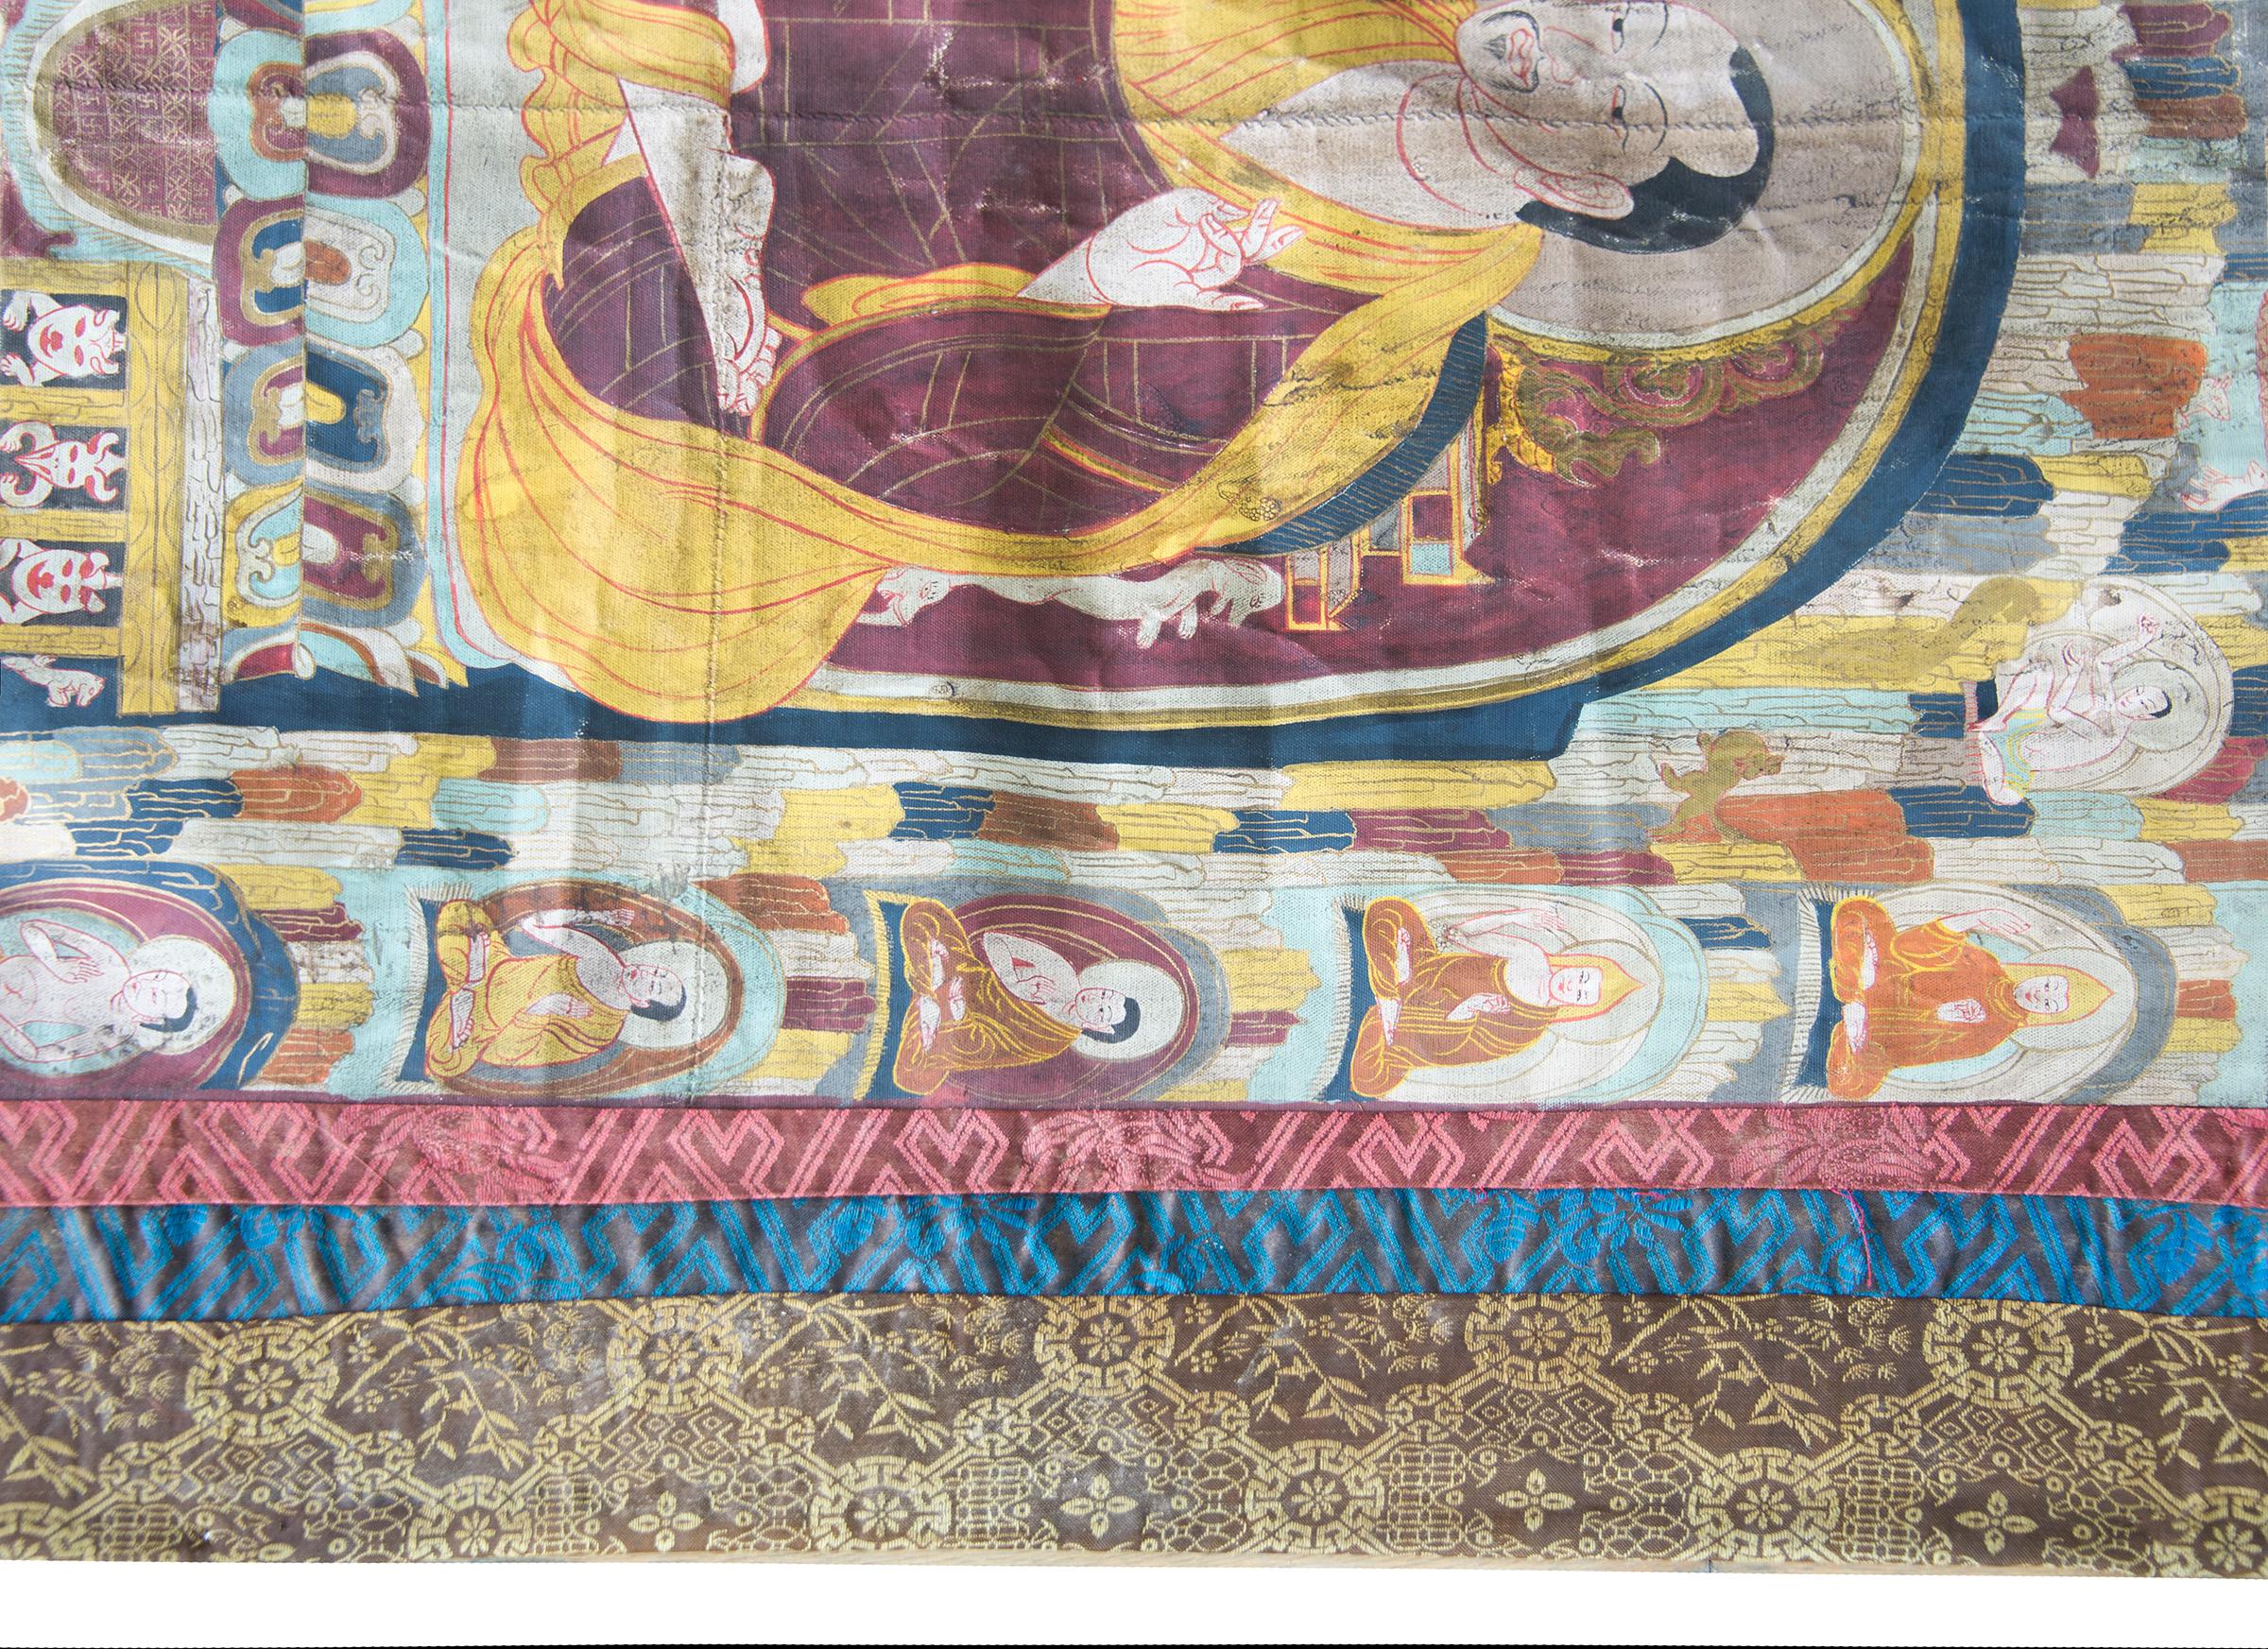 Hand-Painted Late 19th Century Thangka with the Portrait of a Tibetan Monk  For Sale